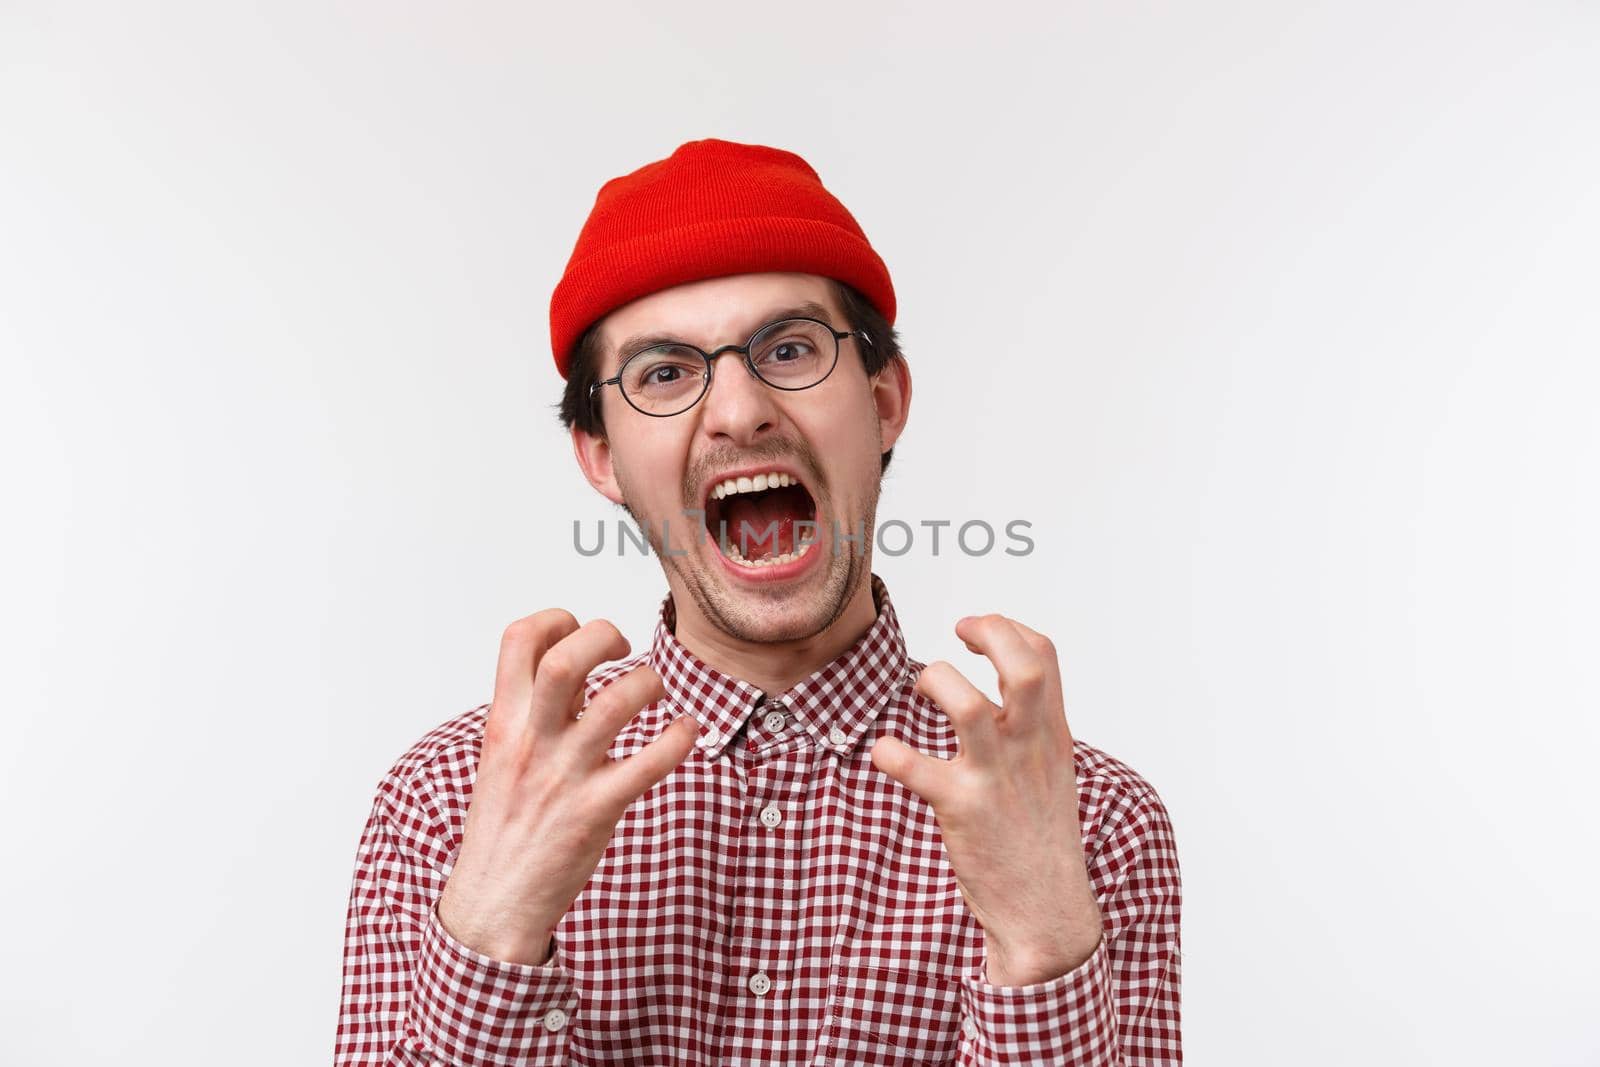 Close-up portrait of distressed and angry young funny hipster guy with moustache wear red beanie, glasses, squeez hands annoyed and bothered, screaming from pissed-off feeling, white background.